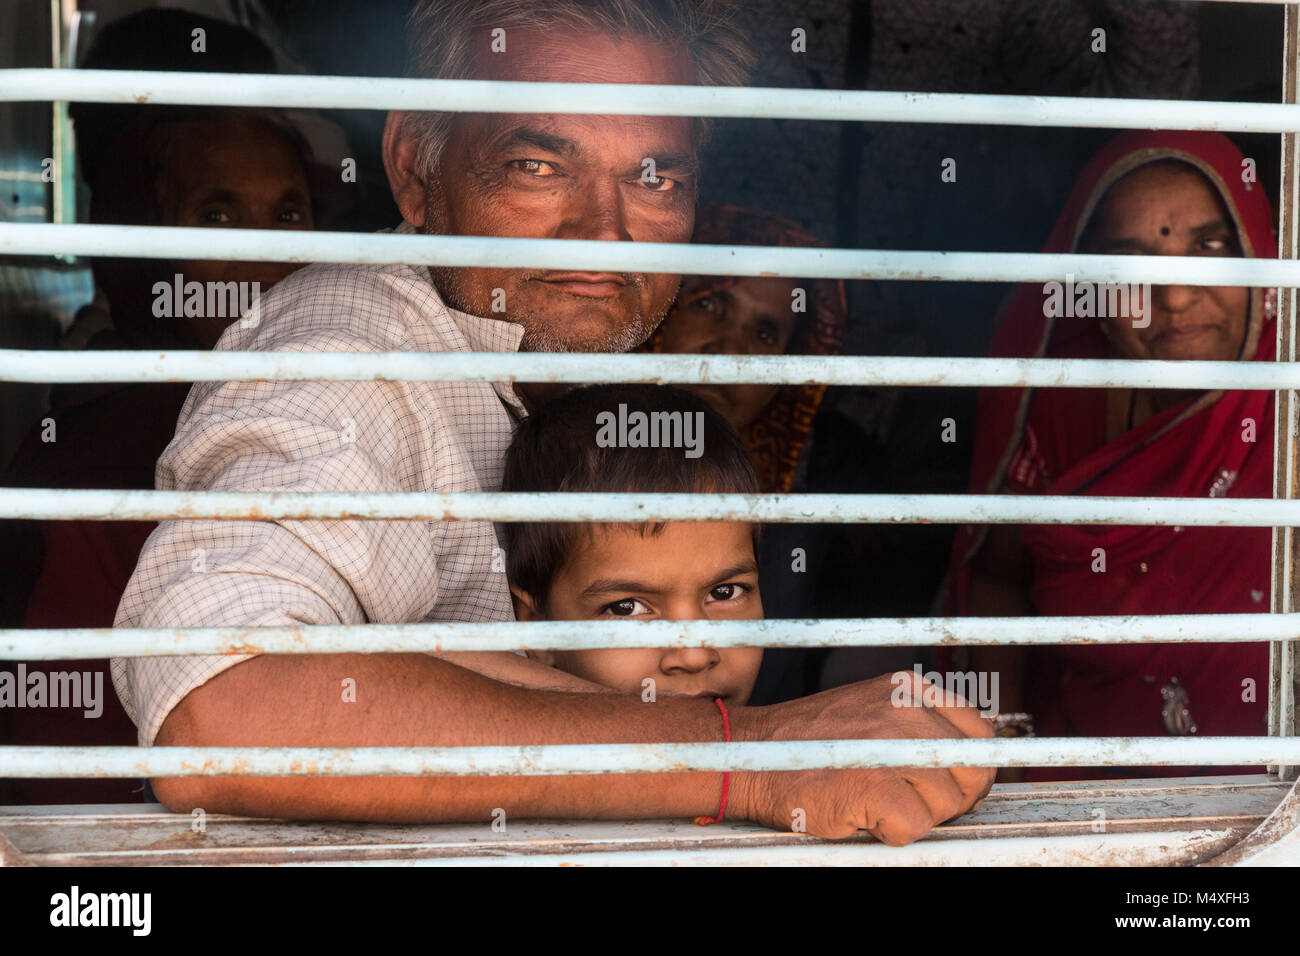 Father and son in an overcrowded indian train, looking proud out of the window, happy to have got a seat. Stock Photo